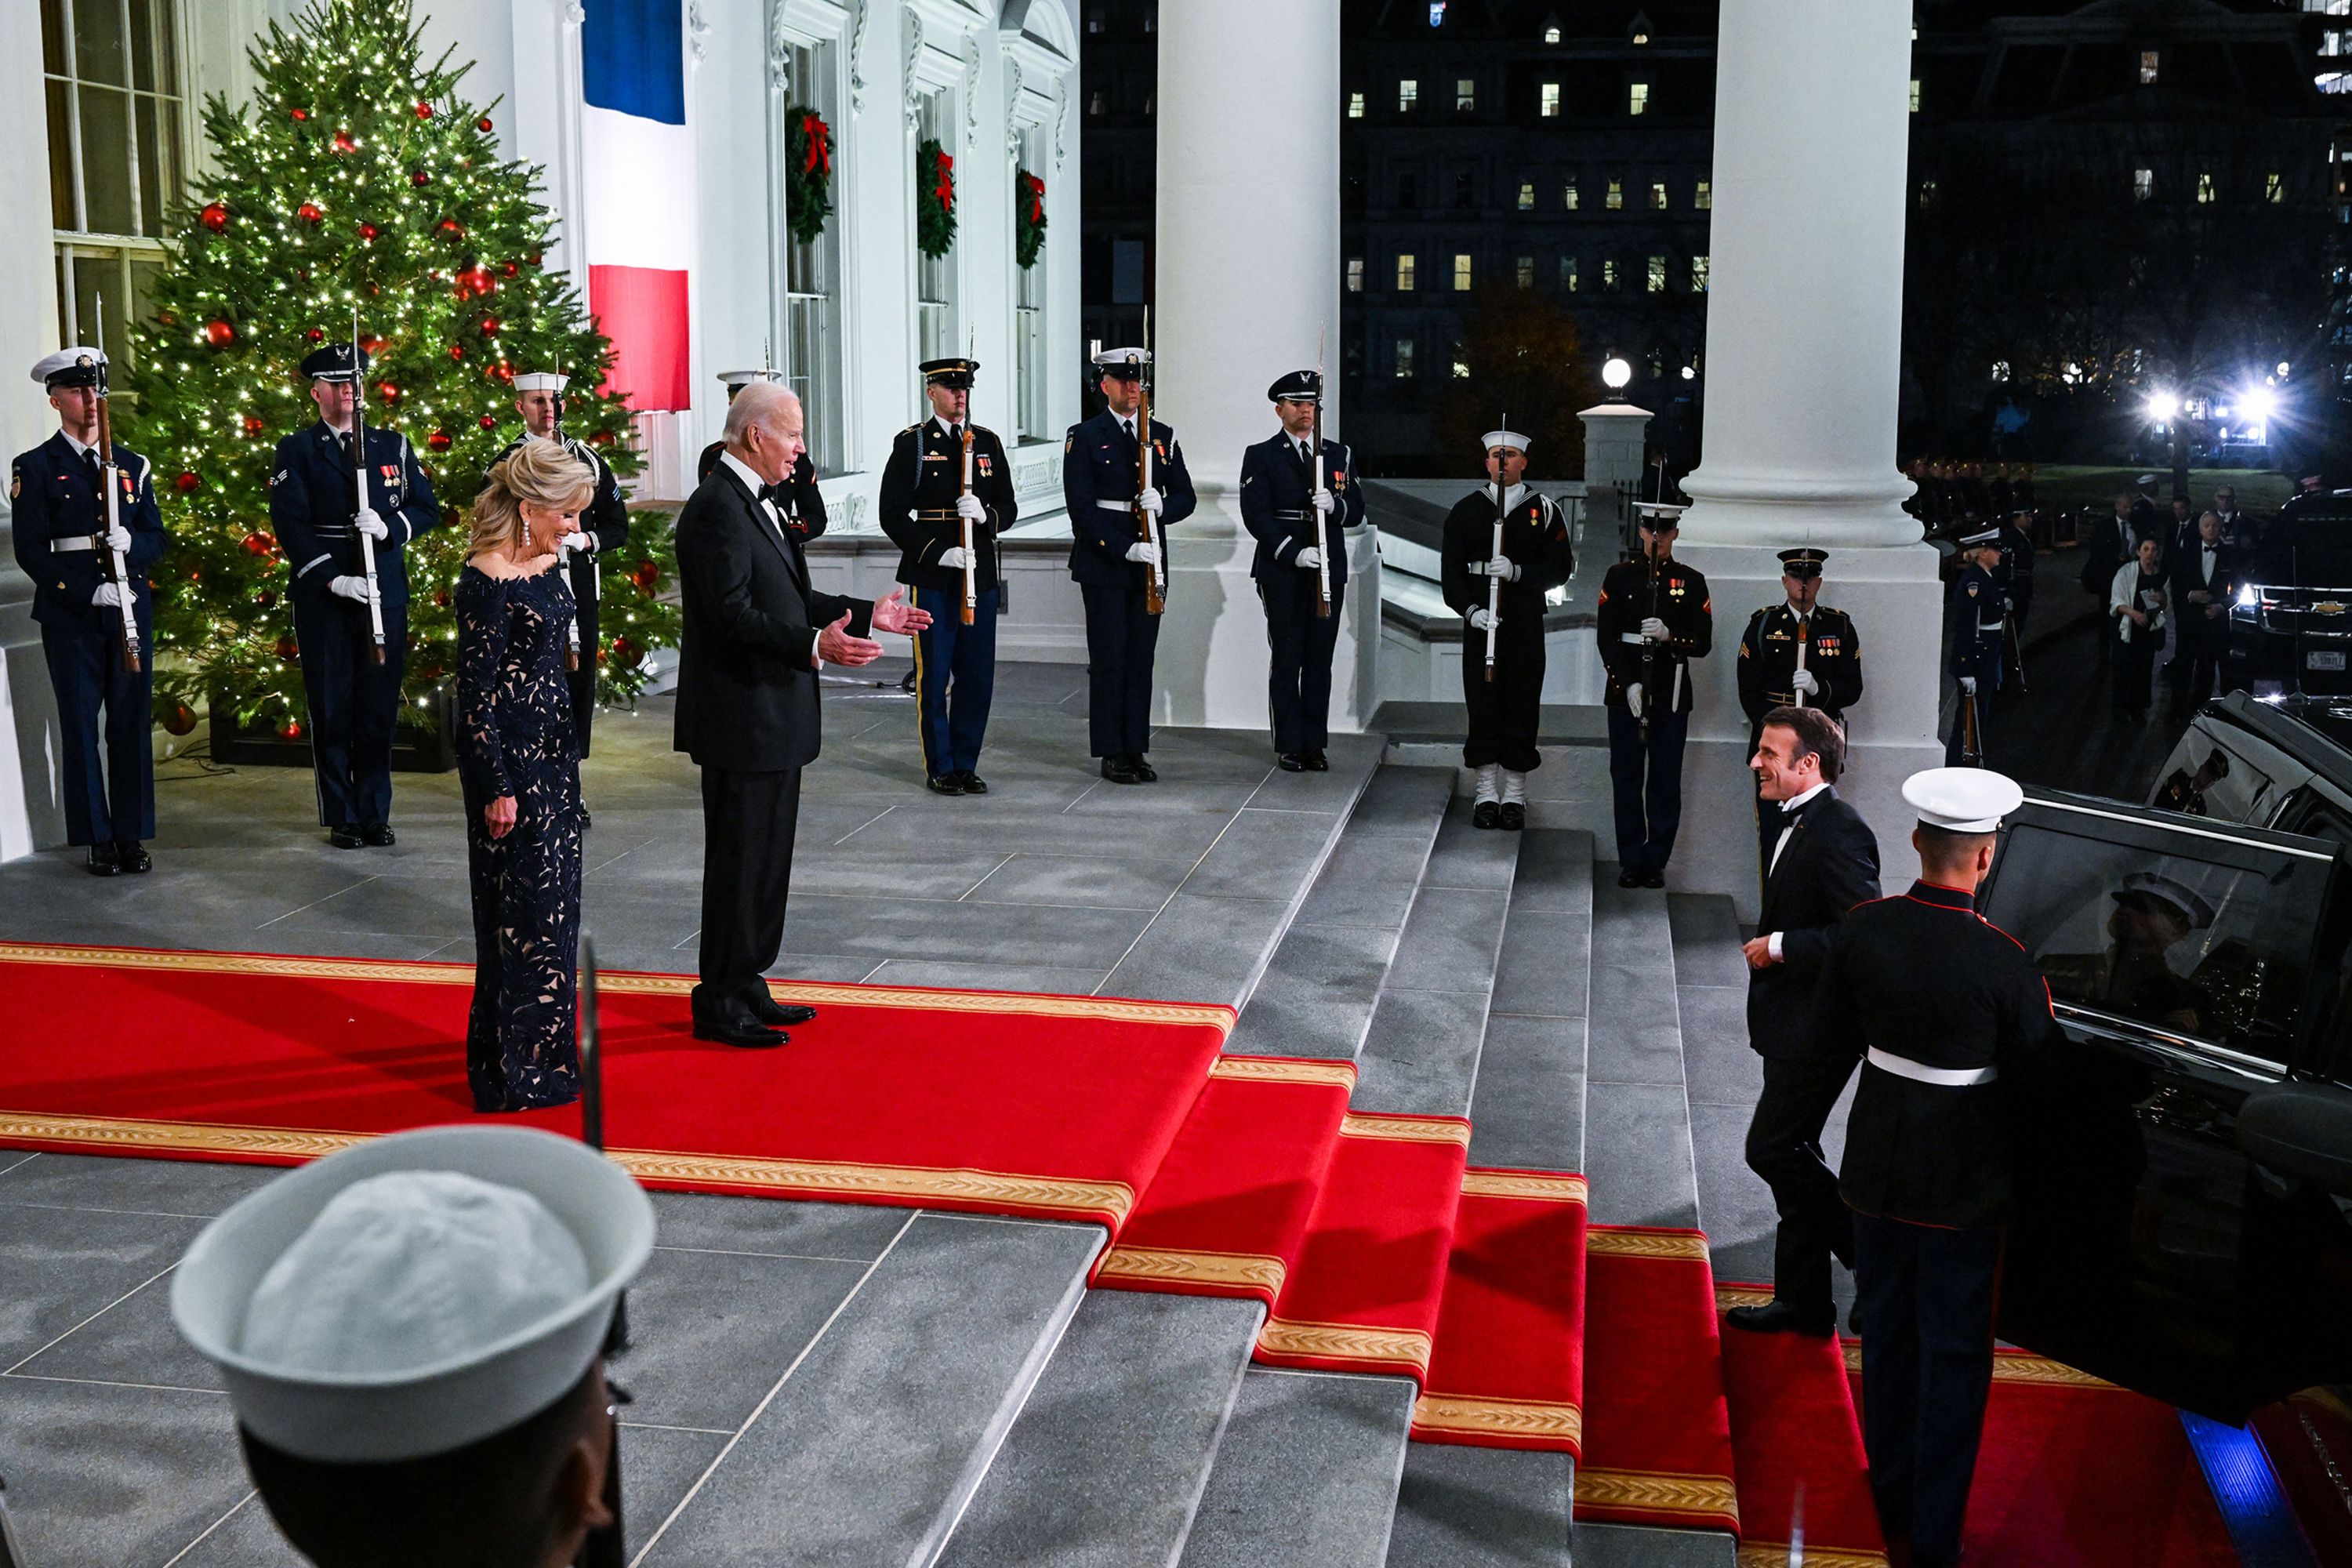 US President Joe Biden and first lady Jill Biden greet French President Emmanuel Macron and his wife, Brigitte Macron, as they arrive for a state dinner at the White House on Thursday, December 1.